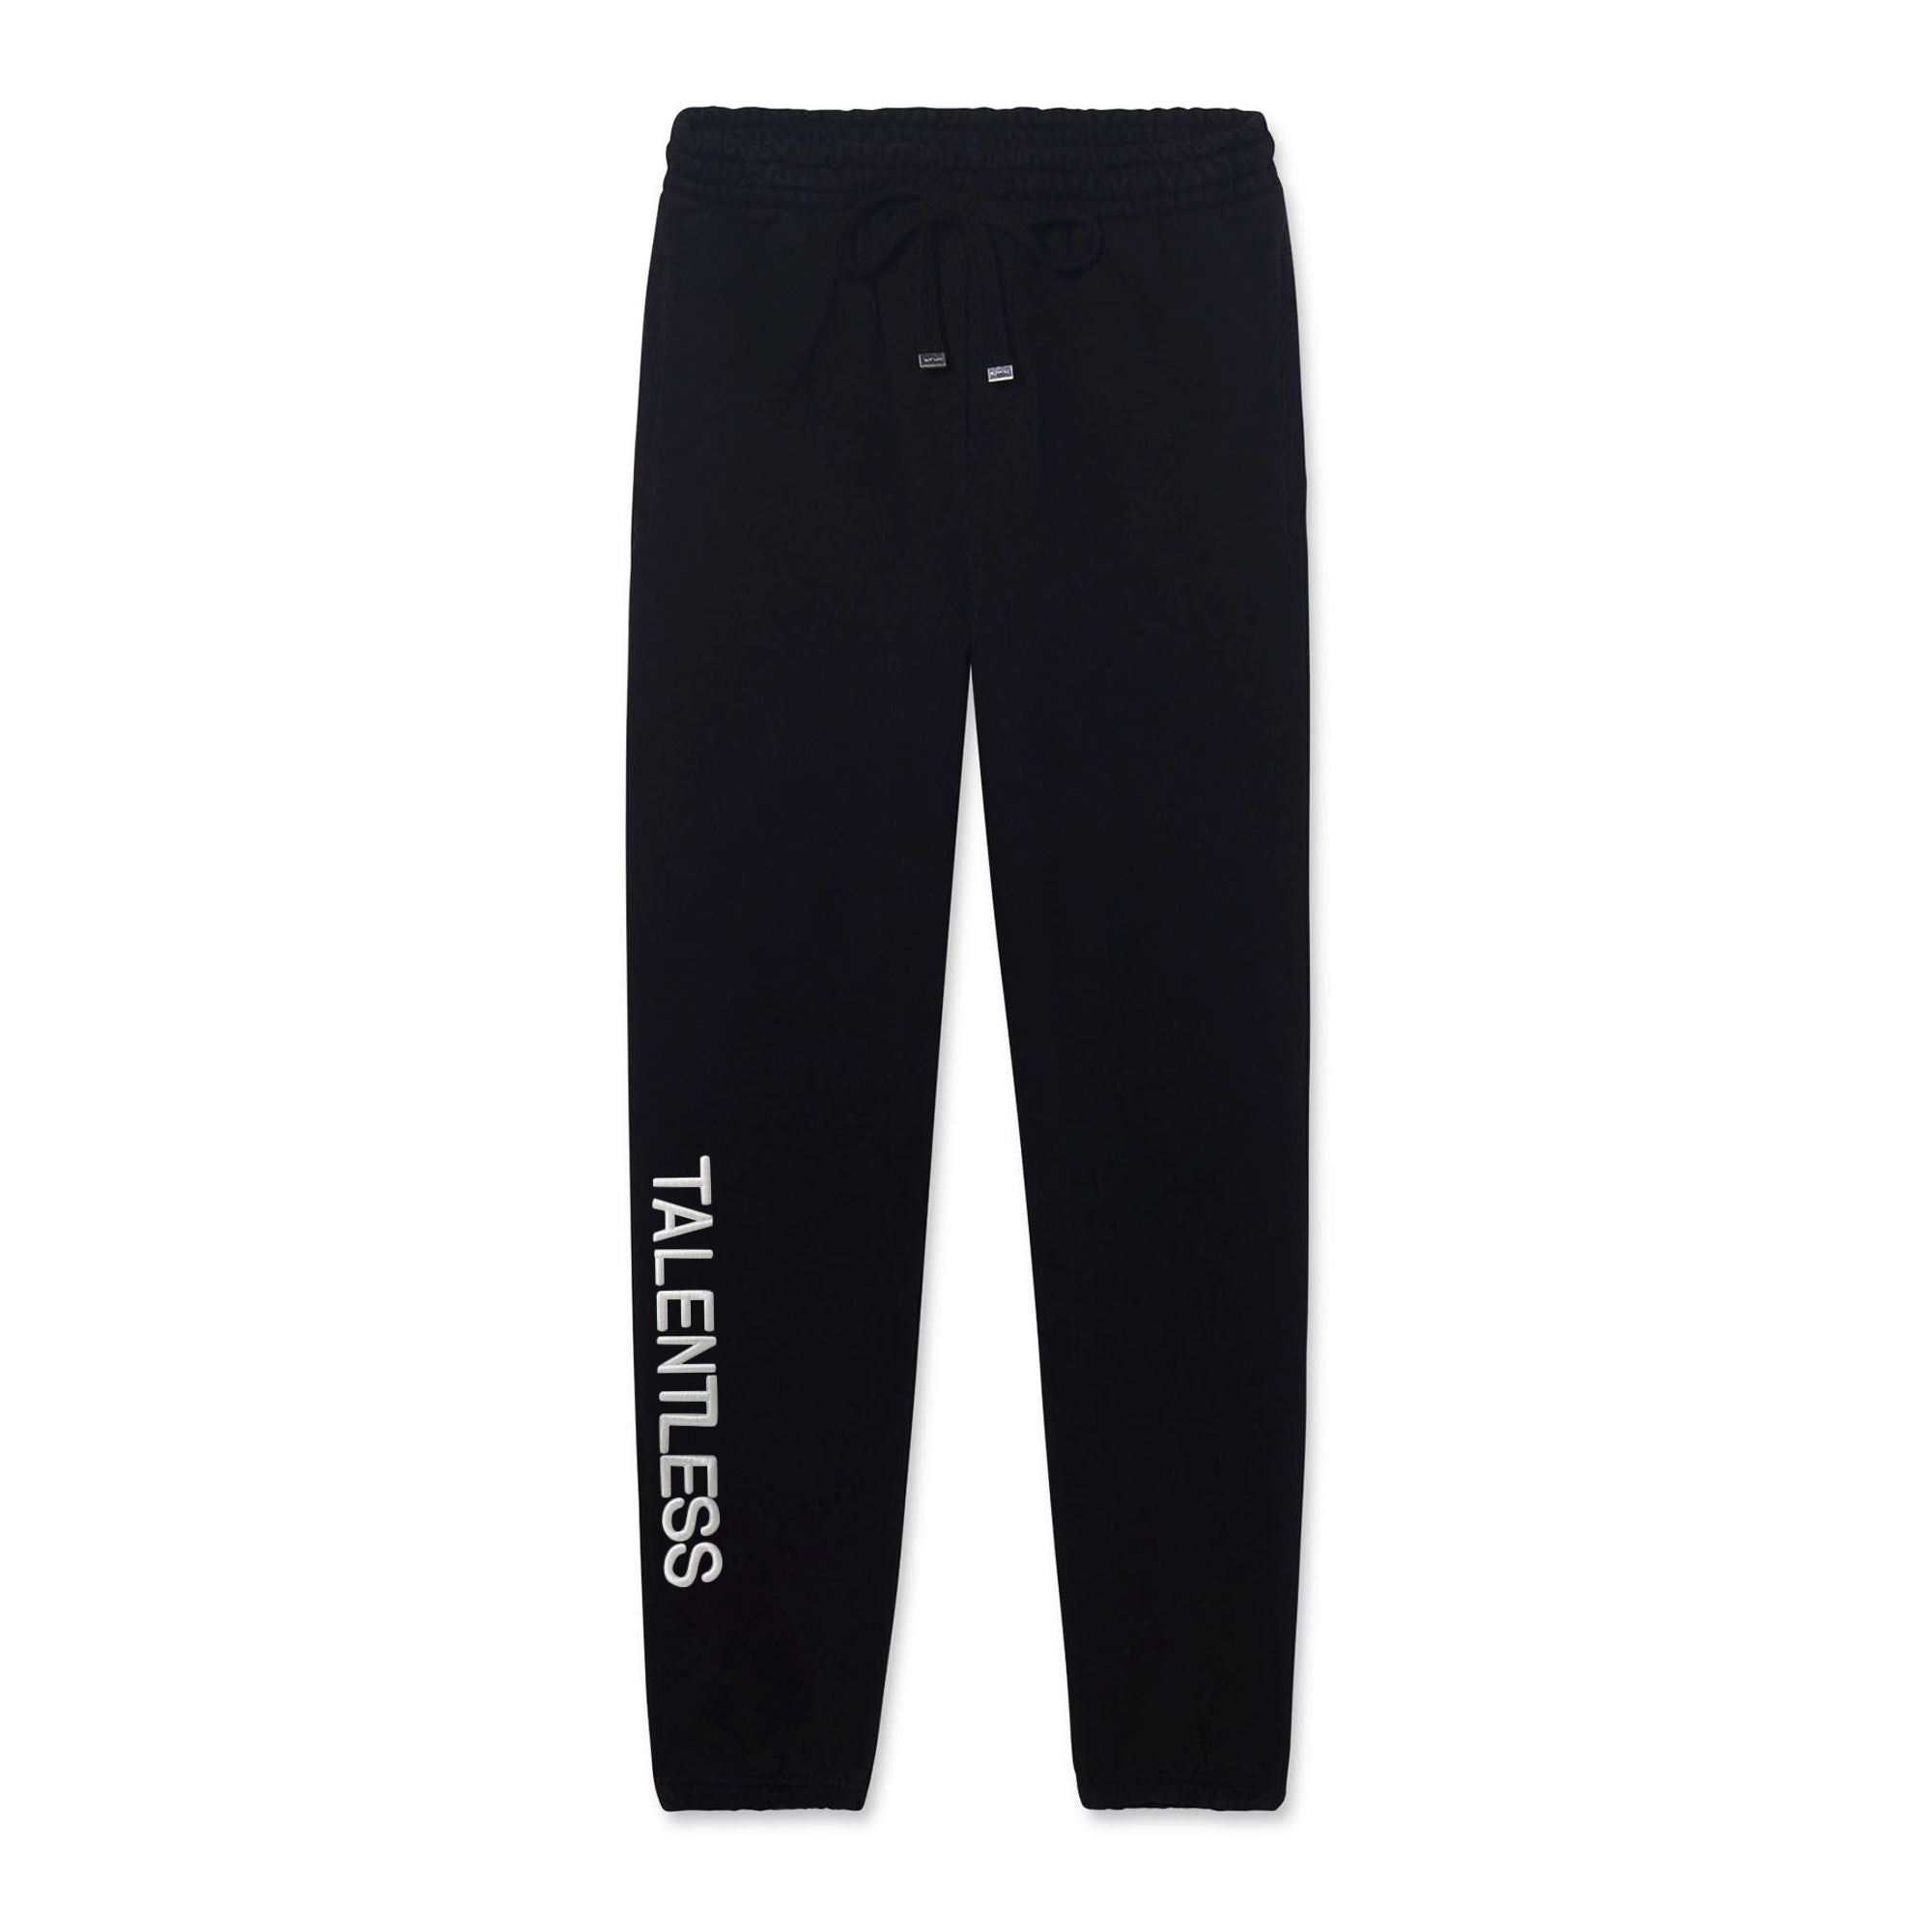 Stacked Embroidered Sweatpants (Grey Heather/White) – Jungle Boys Clothing